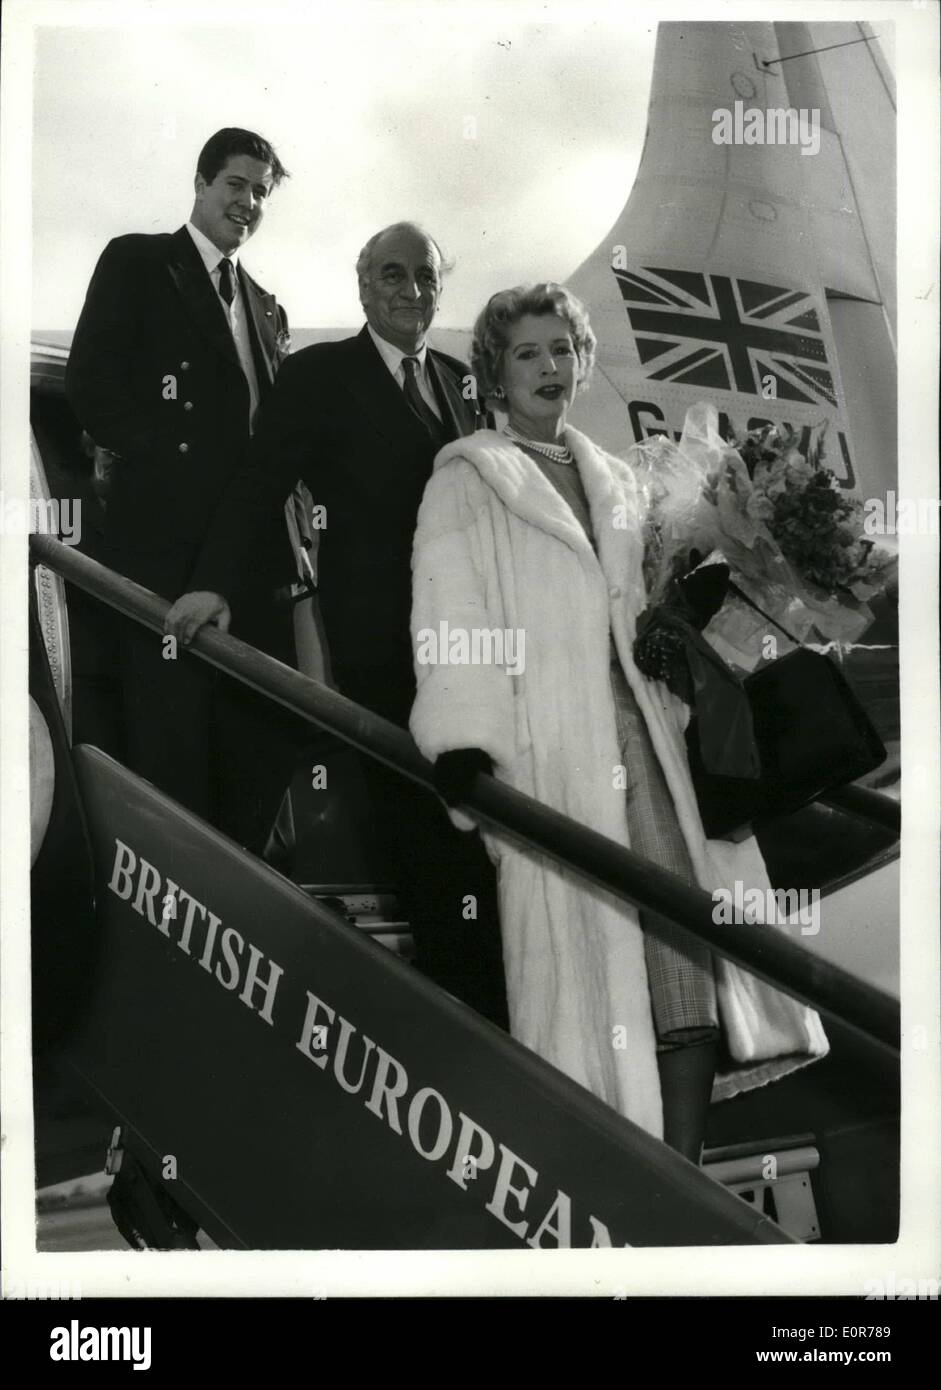 May 05, 1958 - The Dockers Arrive Home From Riviera: Sir Bernard and Lady Docker and the latter's son Alance arrived at London Airport this evening from the French Riviera.. The Dockers have been expelled from the Monaco and Alpes-Maritime Province of France which includes Cannes and Nice following an incident in which Lady Docker is alleged to have destroyed a Monegasque flag. Photo shows Sir Bernard and Lady Docker followed by Lance, leaving the aircraft on arrival at London Airport this evening. Stock Photo